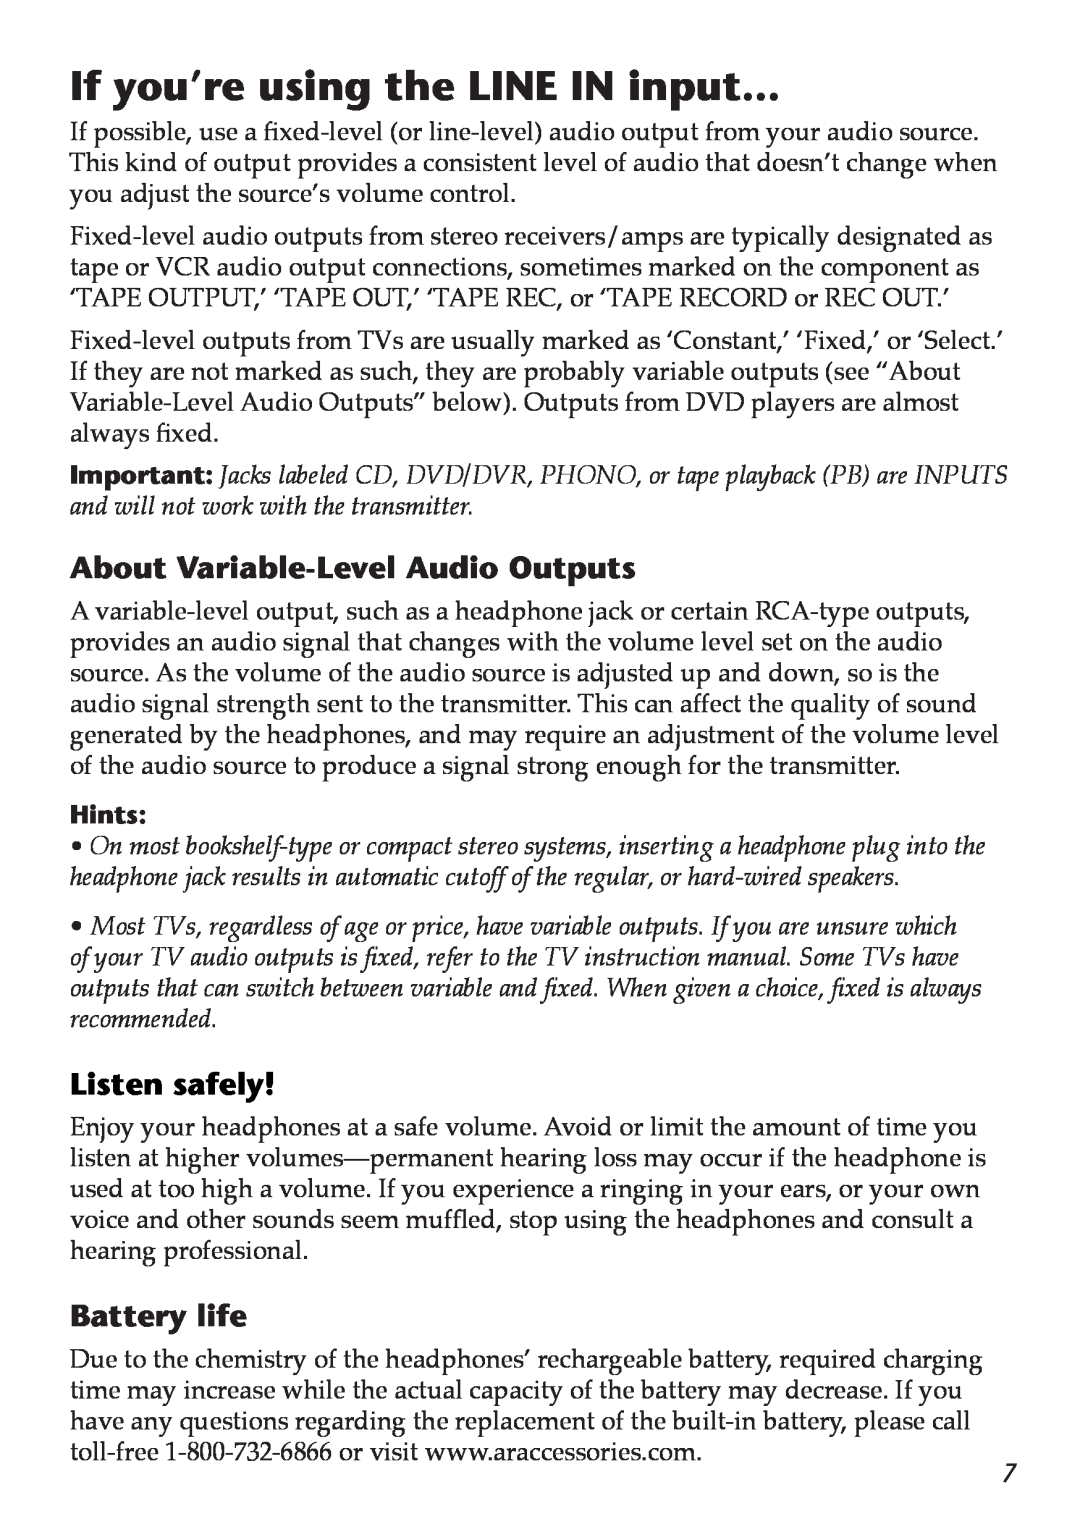 Acoustic Research AW-D510 owner manual If you’re using the LINE IN input, About Variable-LevelAudio Outputs, Listen safely 